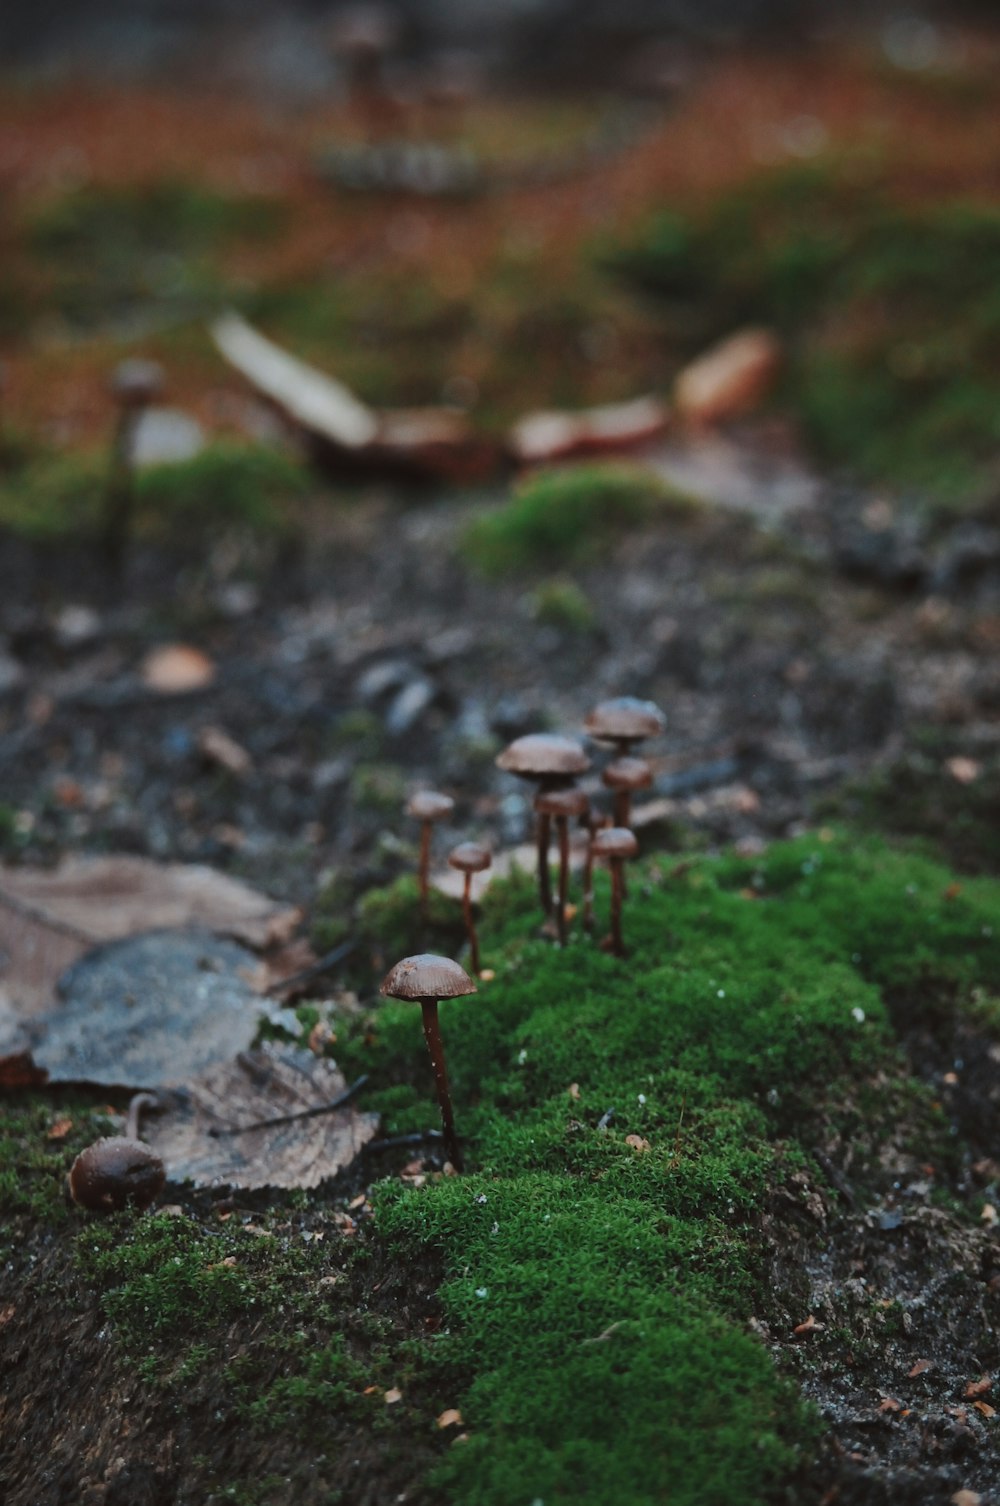 mushrooms growing in a mossy area